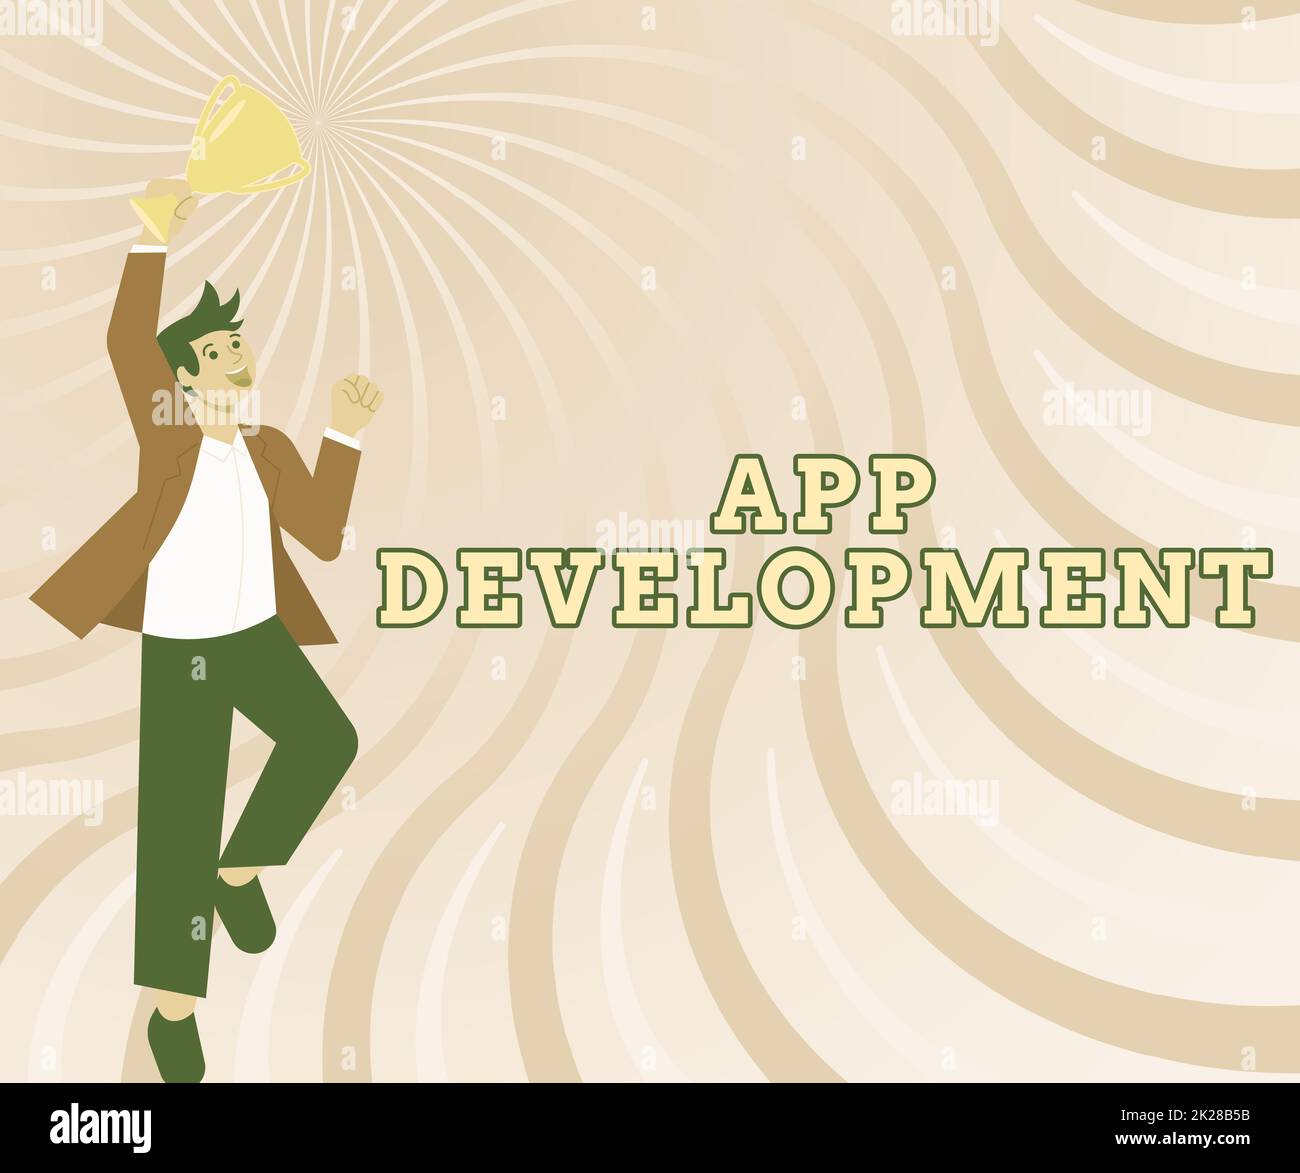 Sign displaying App Development. Word Written on Development services for awesome mobile and web experiences Gentleman Jumping Excitedly Holding Trophy Showing Accomplishments. Stock Photo